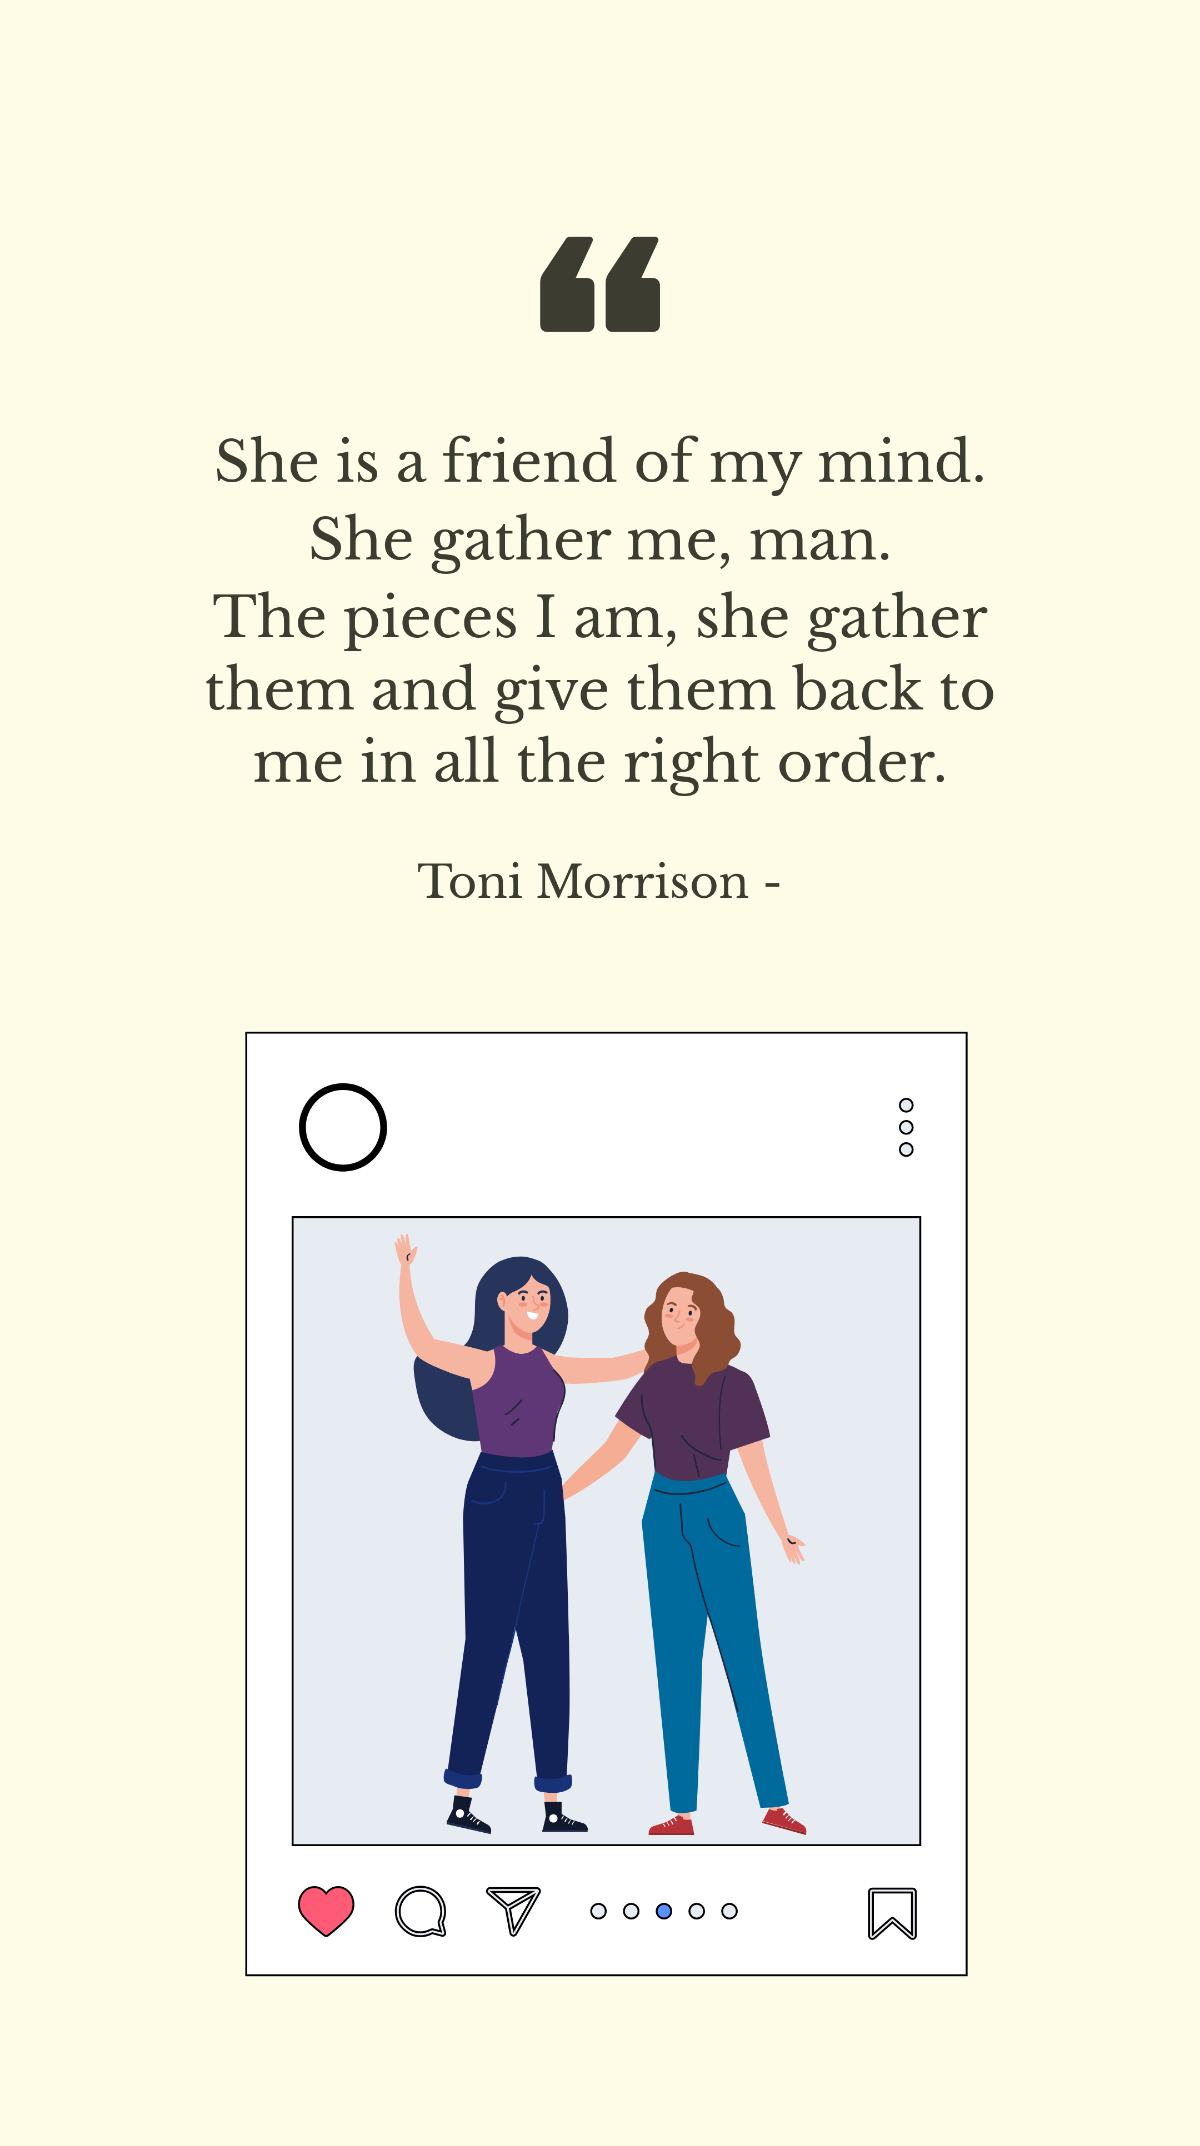 Toni Morrison - She is a friend of my mind. She gather me, man. The pieces I am, she gather them and give them back to me in all the right order. Template